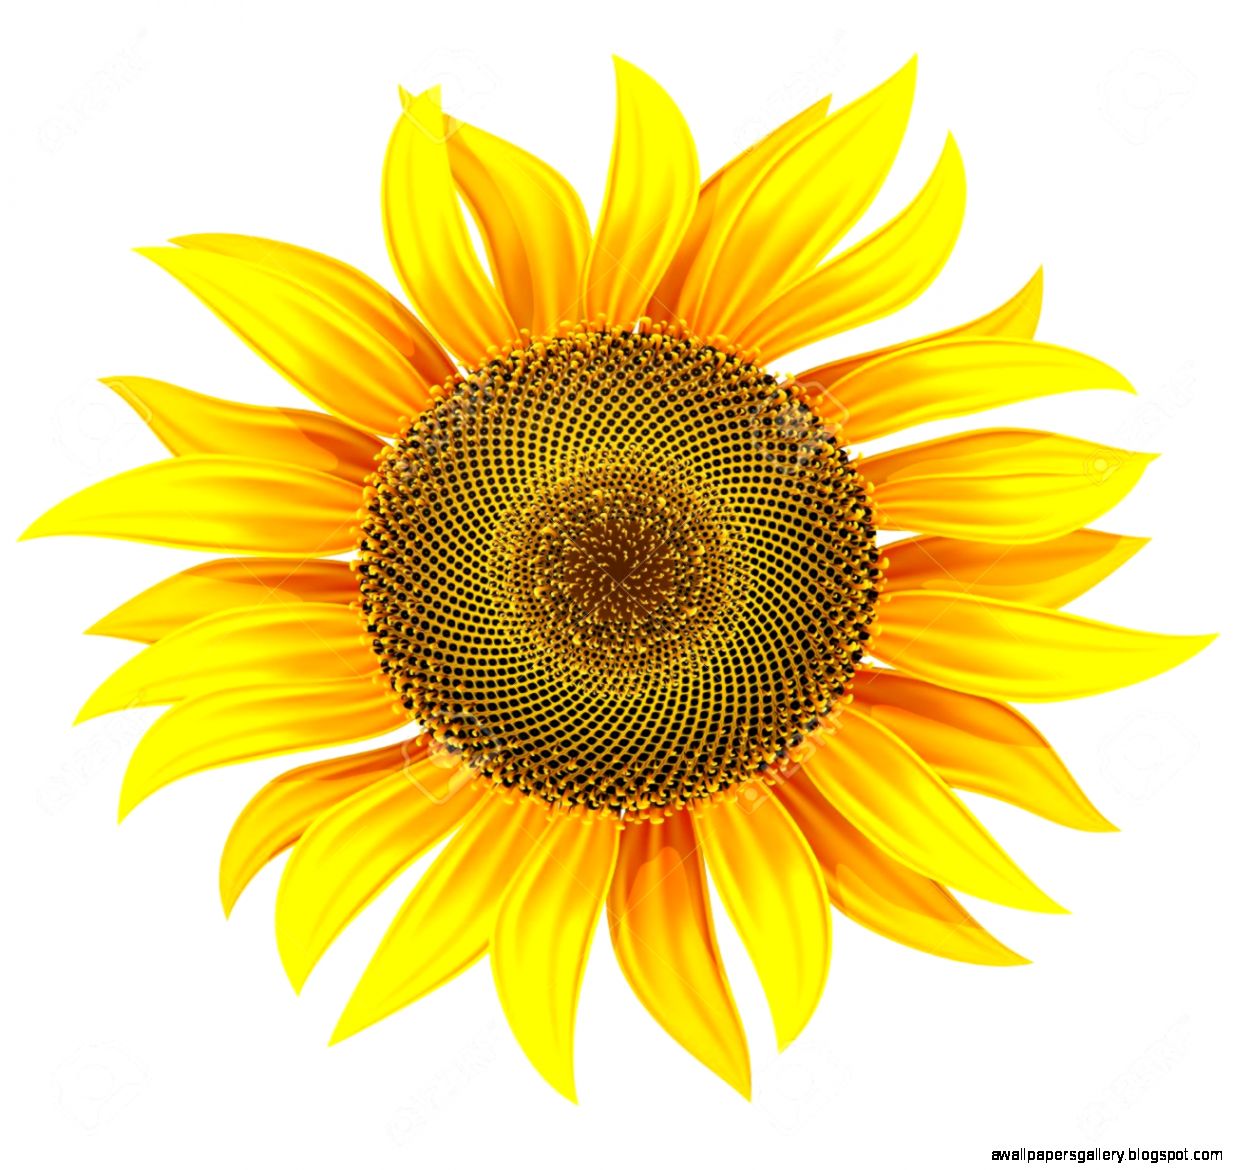 Sunflower Illustration | Wallpapers Gallery